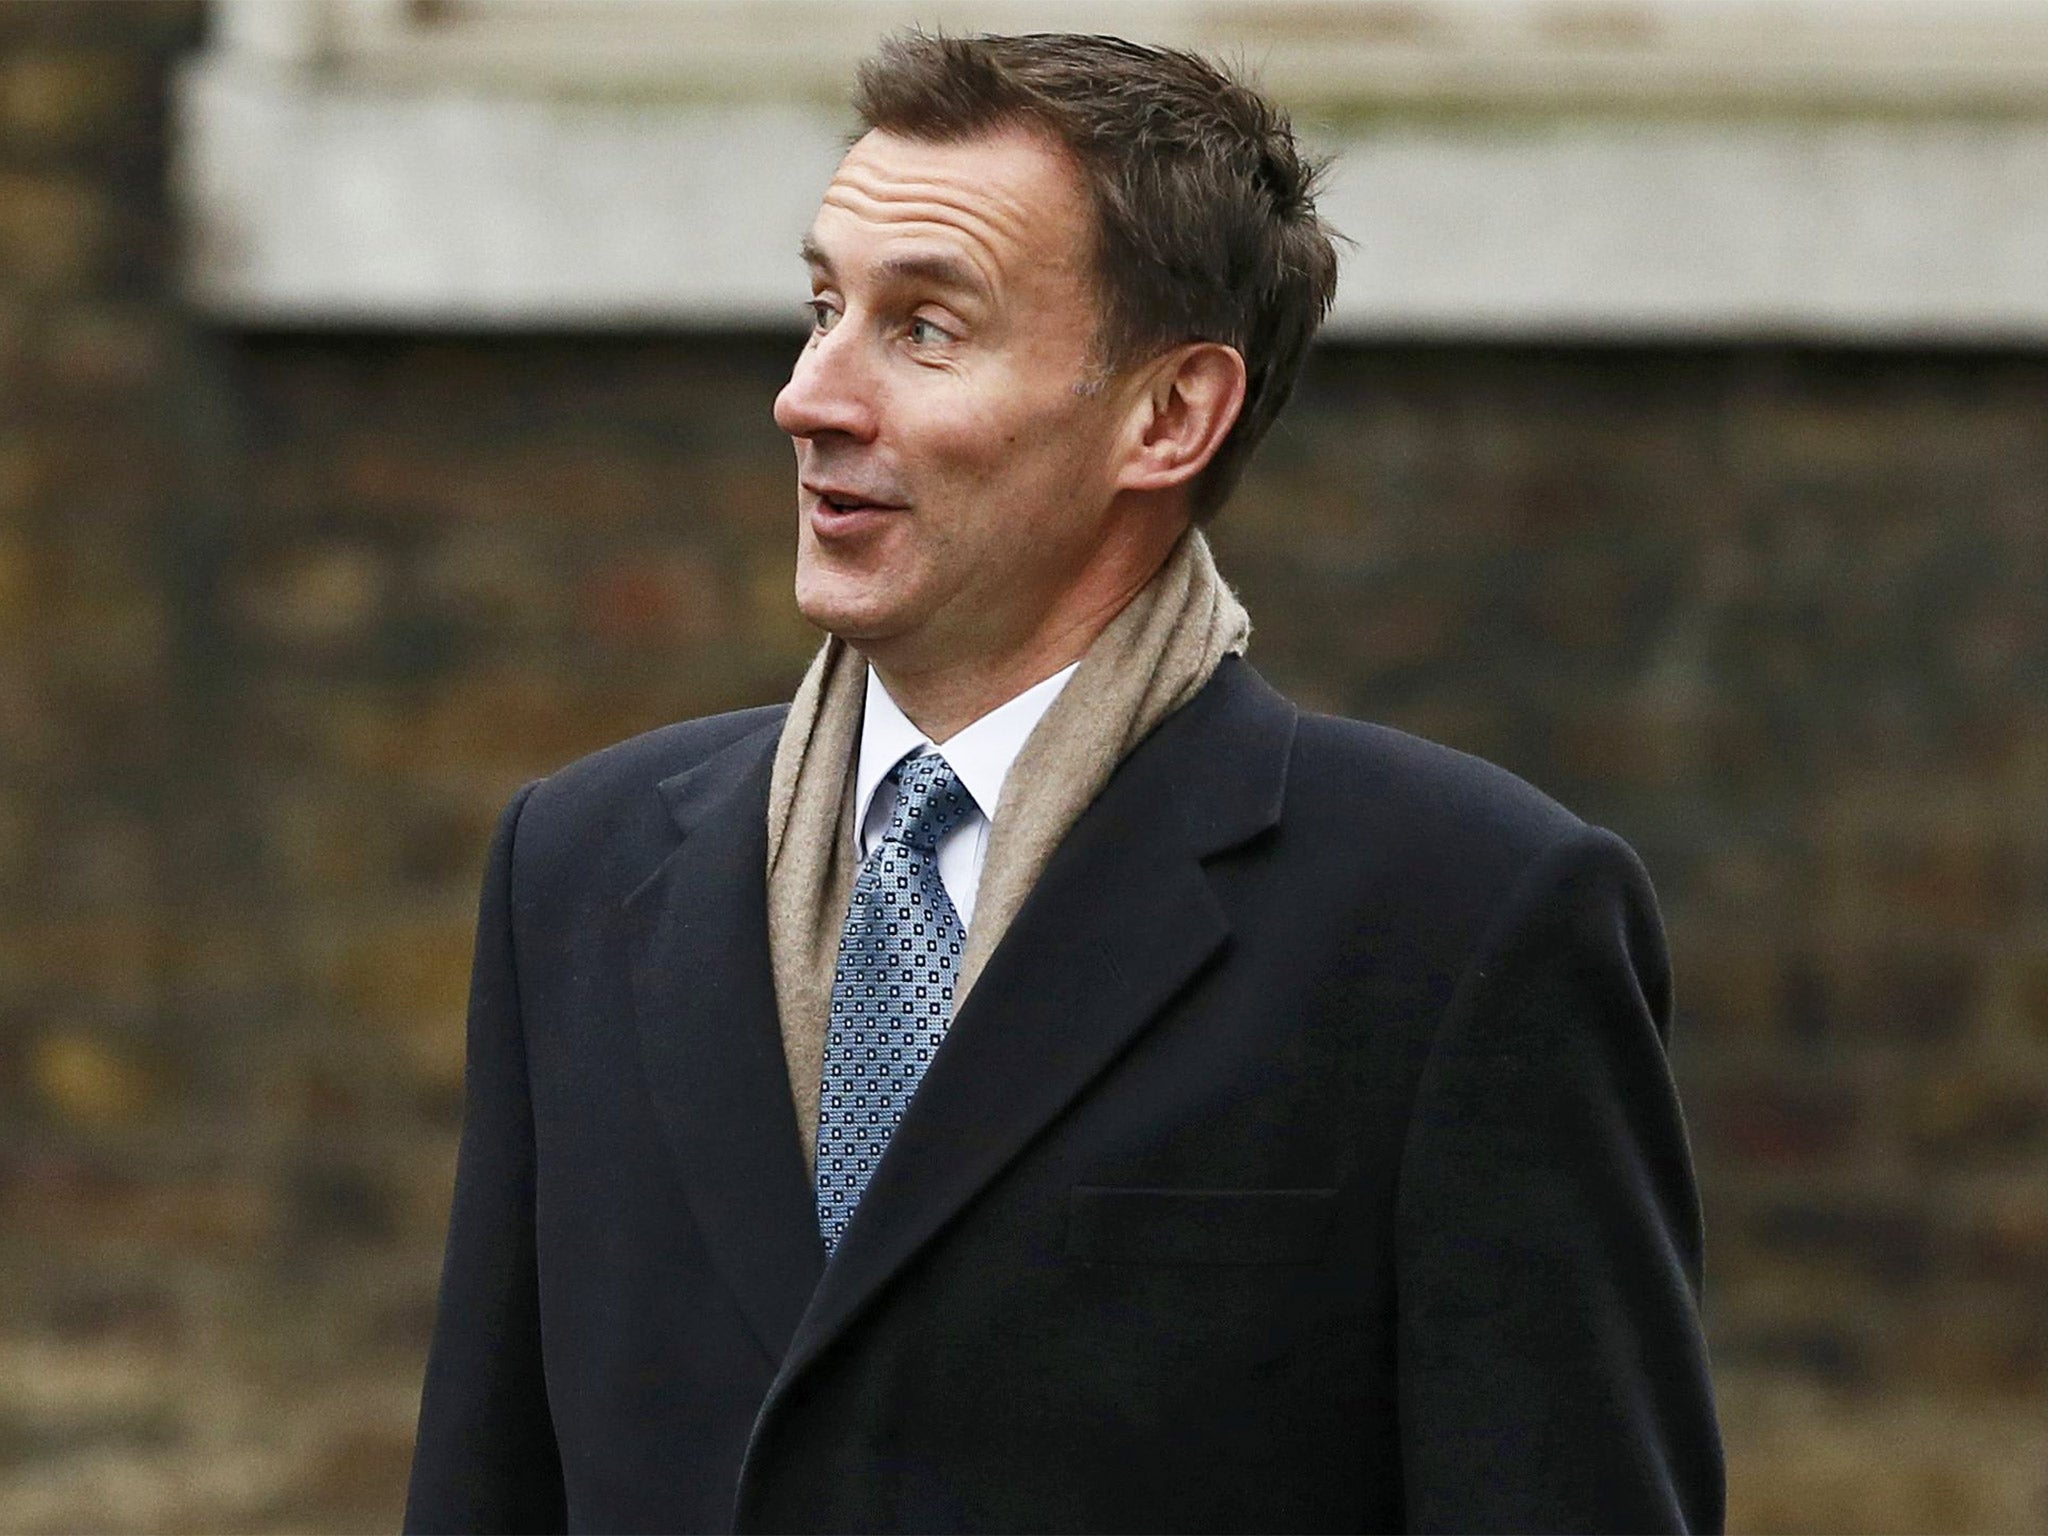 Health Secretary Jeremy Hunt arrives for a cabinet meeting at Number 10 Downing Street earlier this week